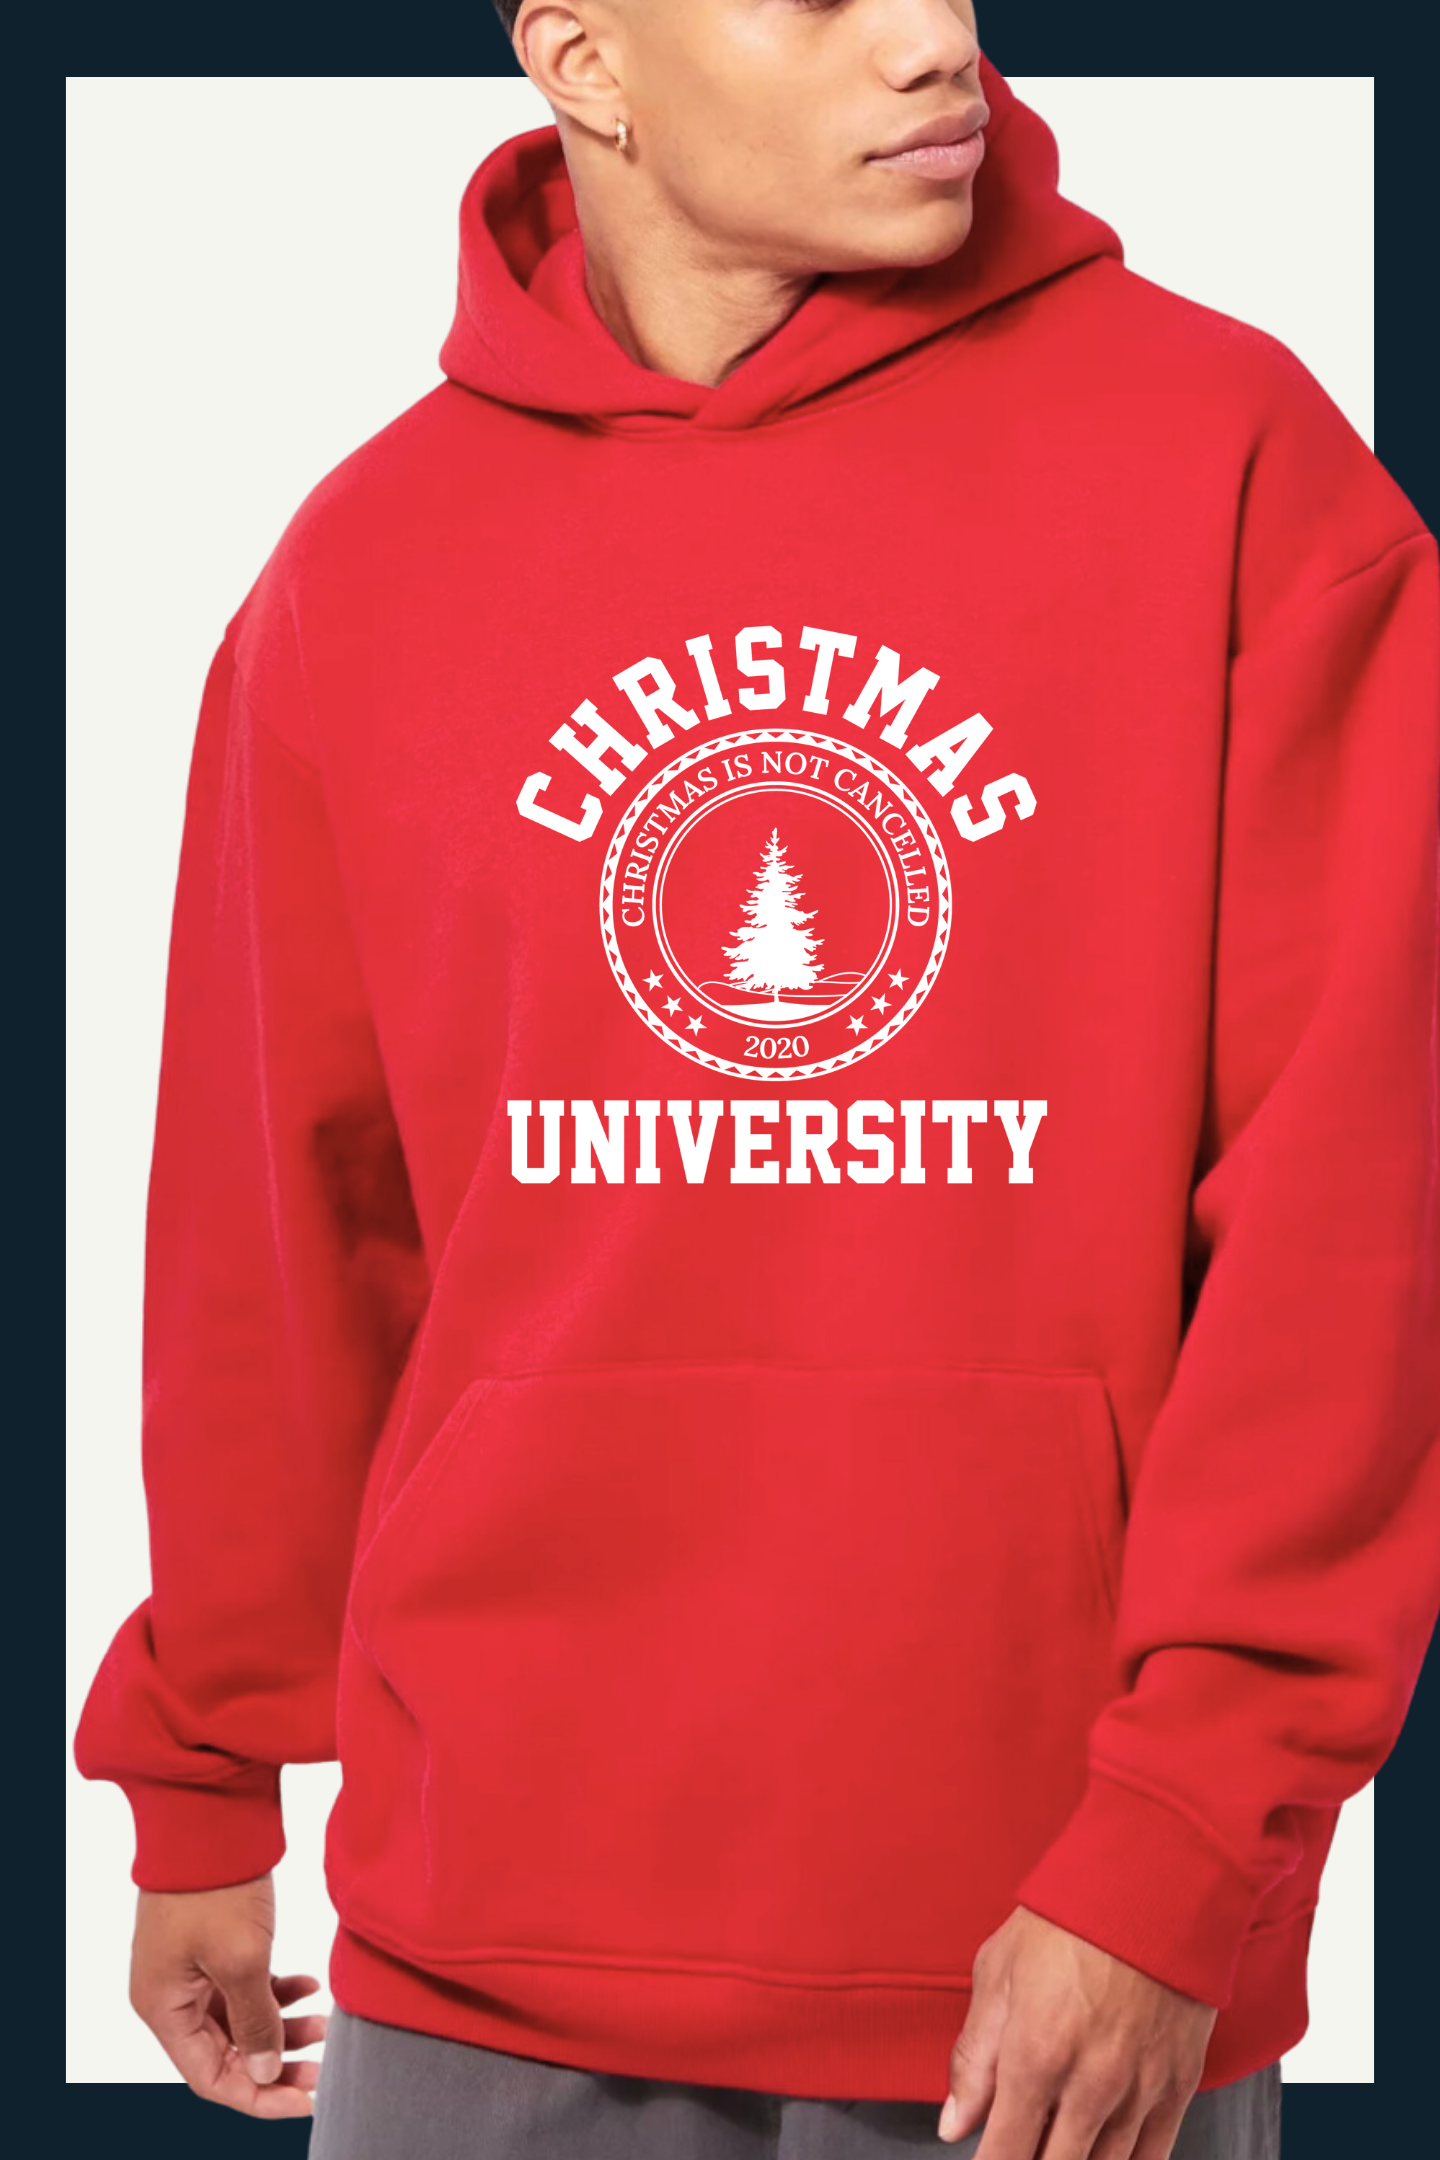 CHRISTMAS UNIVERSITY SIGNATURE HOODIE in Rudolph's Red Nose Red.